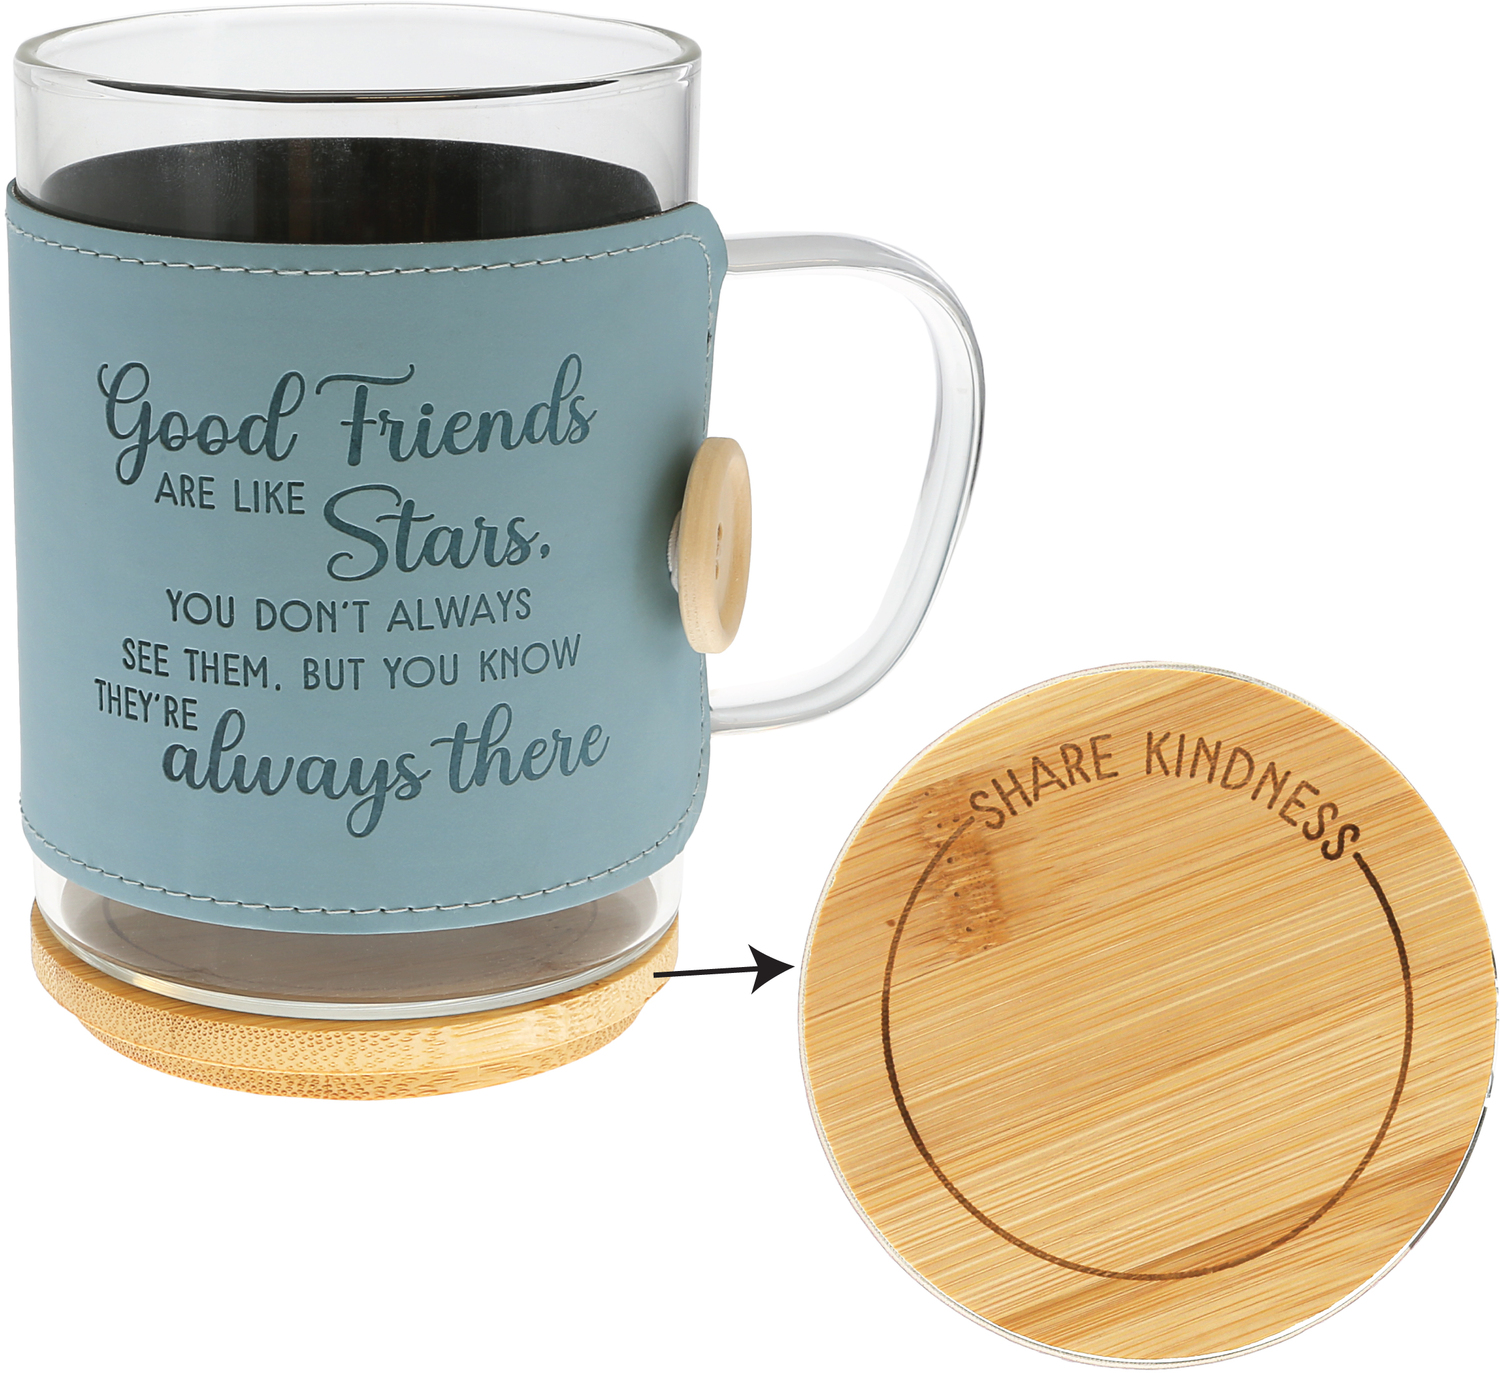 Good Friends by Wrapped in Kindness - Good Friends - 16 oz Wrapped Glass Mug with Coaster Lid